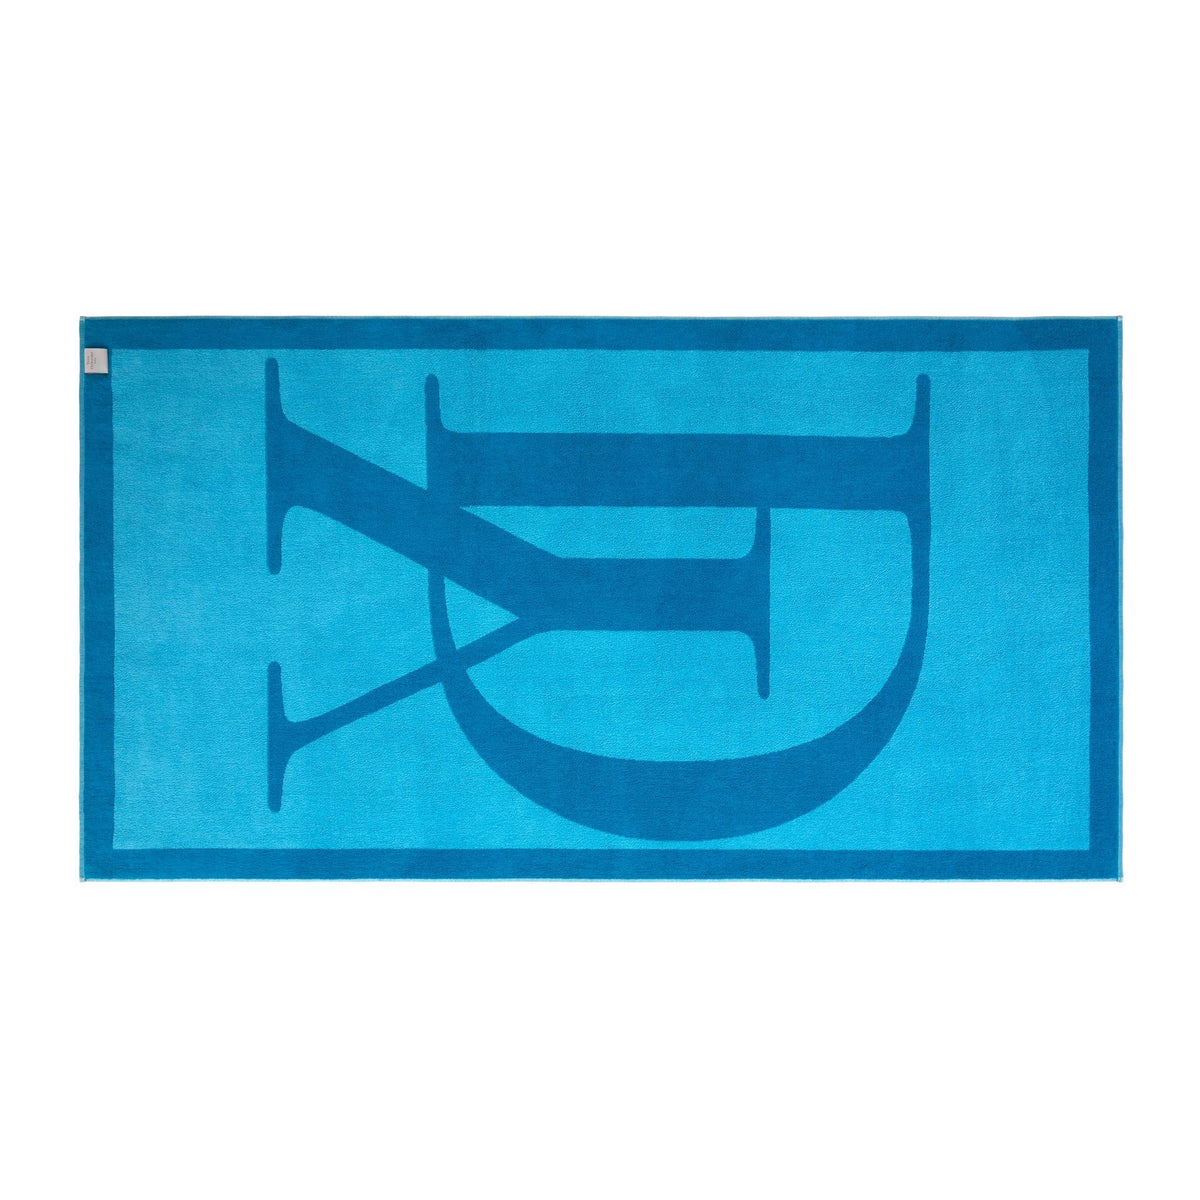 Back View of Yves Delorme Griffe Beach Towel in Jacuzzi Color